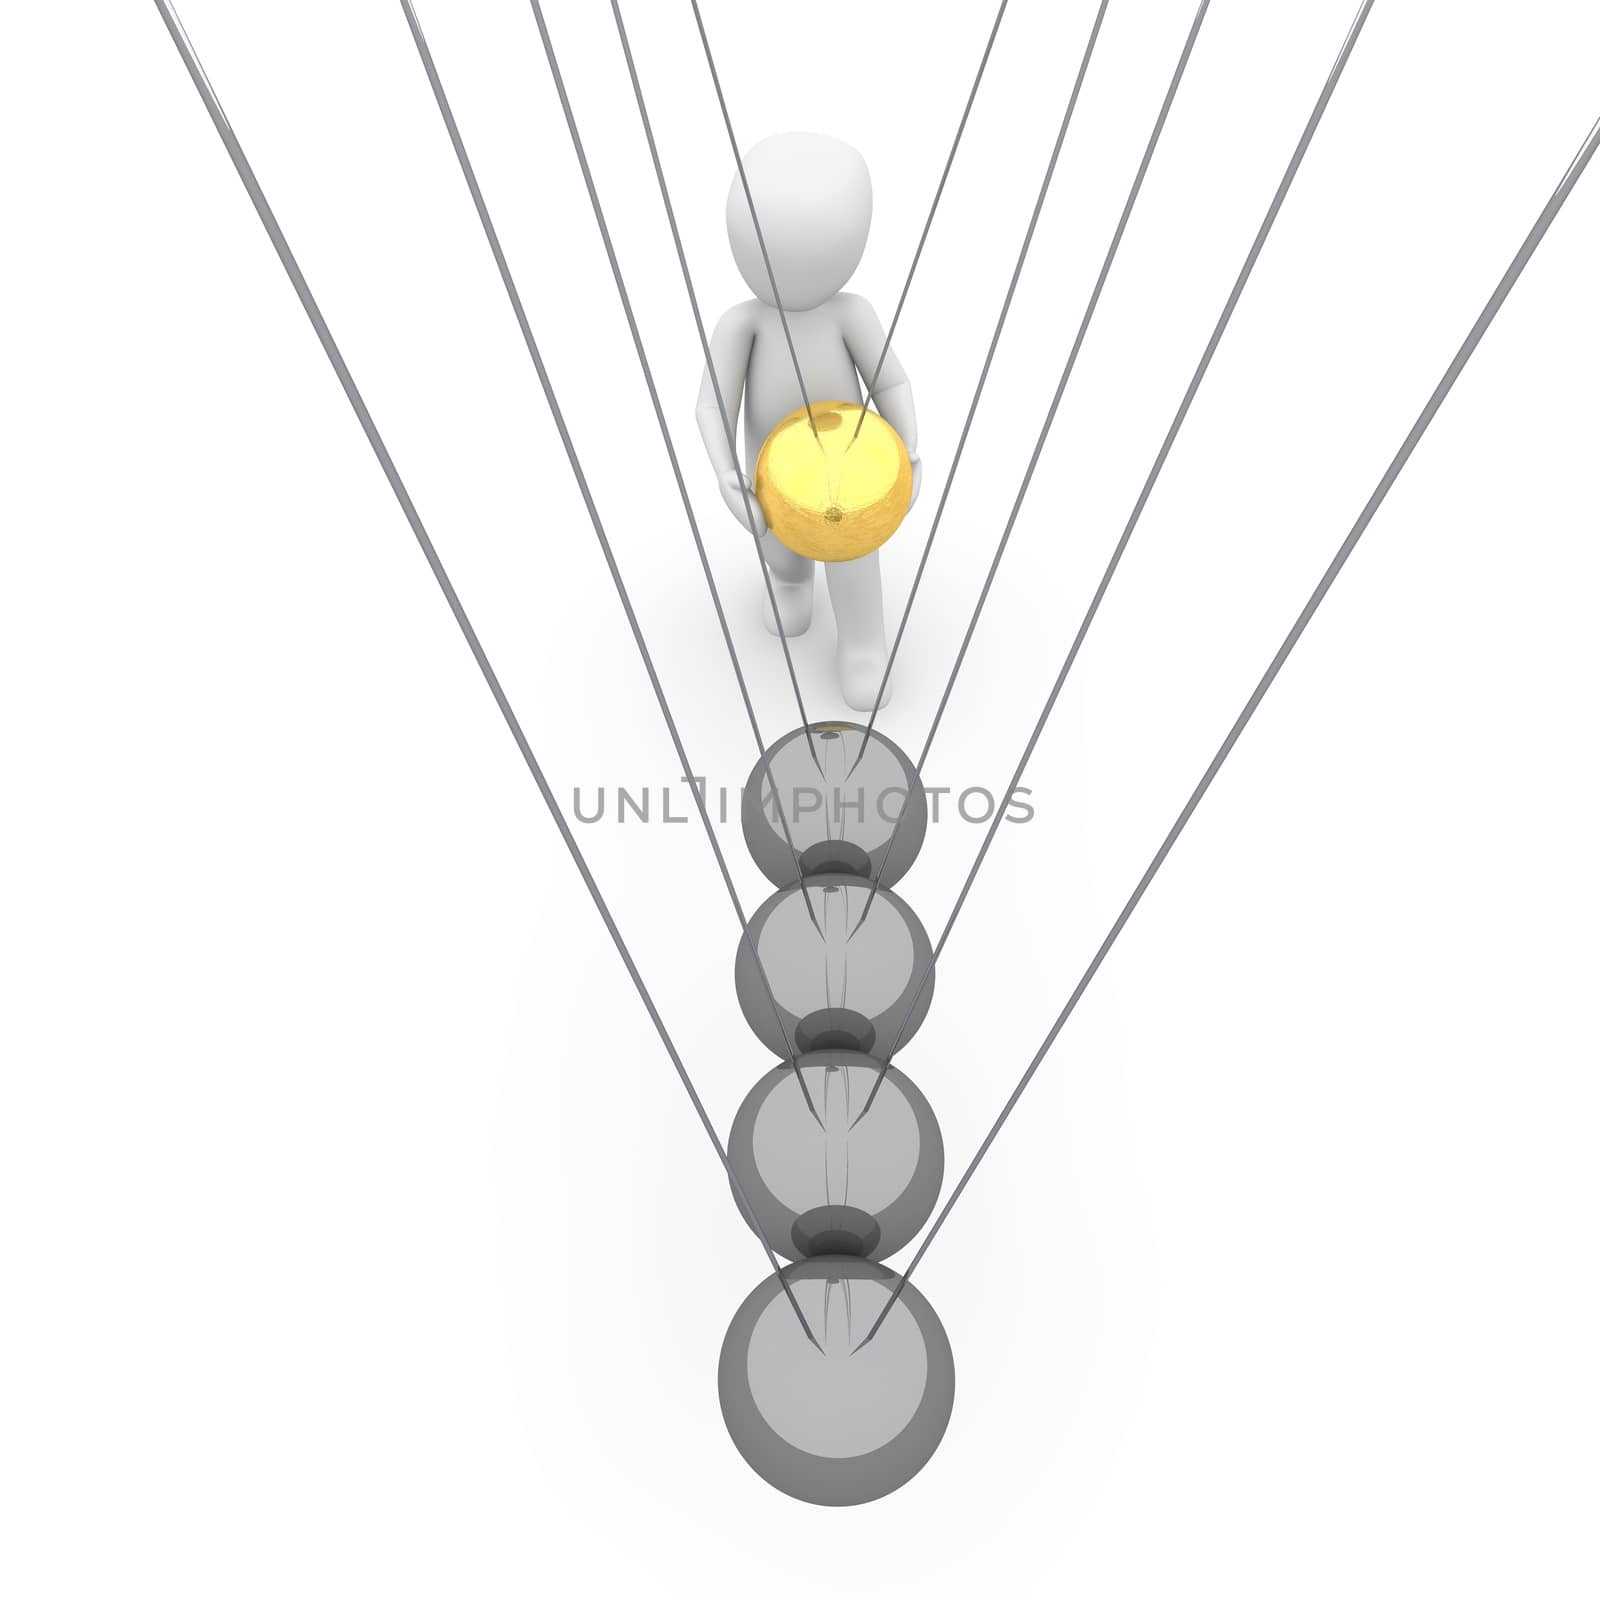 A character uses the golden newton cradle in motion.